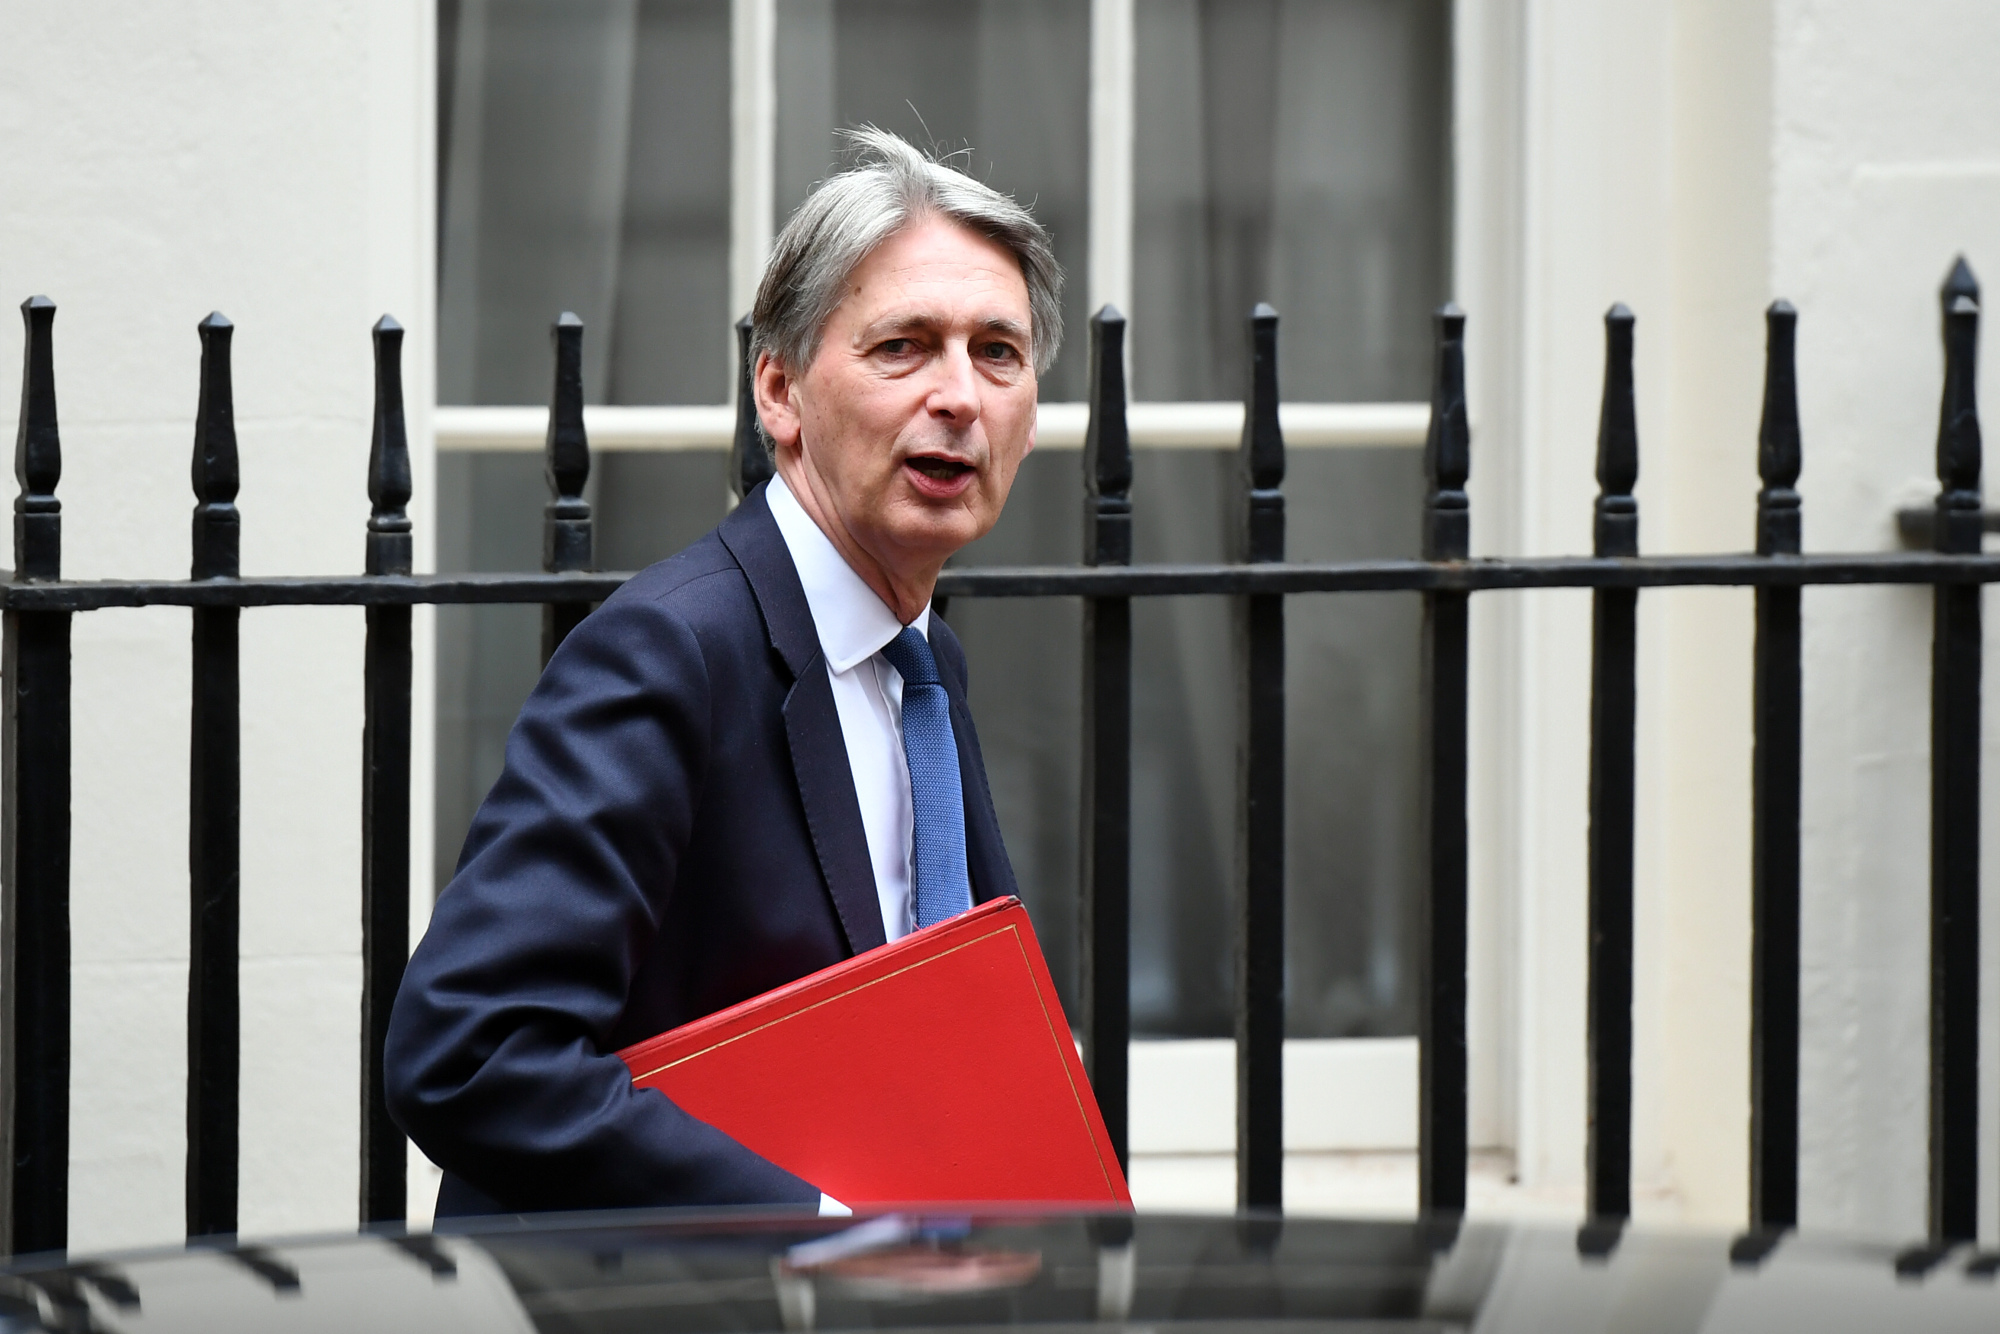 Philip Hammond, U.K. chancellor of the exchequer, leaves after a cabinet meeting at number 10 Downing Street in London, on&nbsp;Oct. 24.&nbsp;